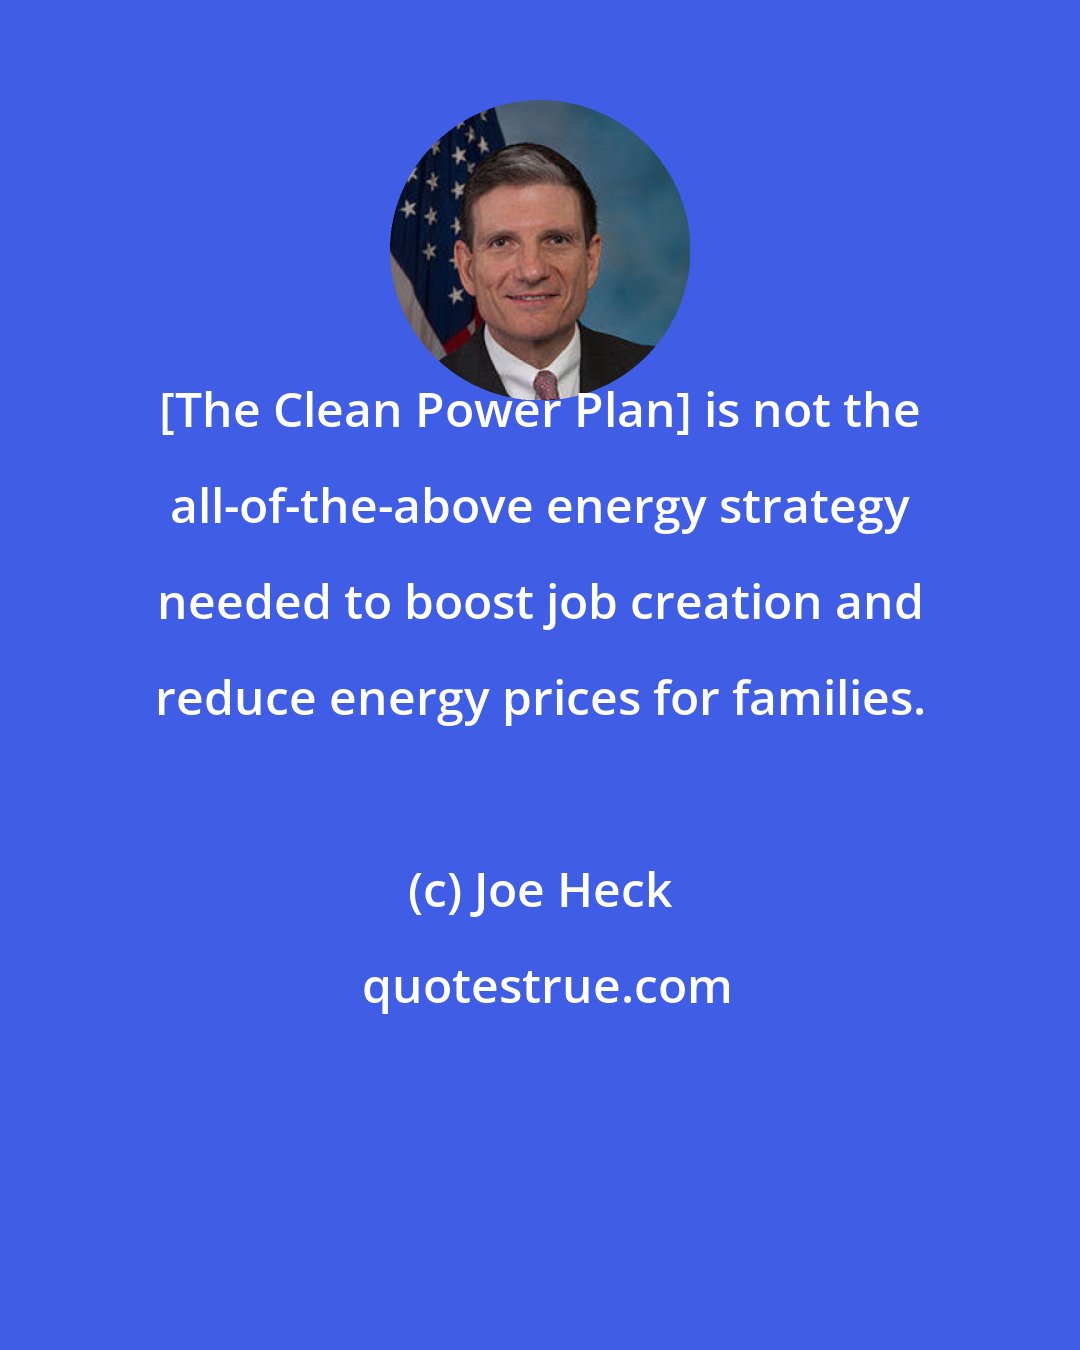 Joe Heck: [The Clean Power Plan] is not the all-of-the-above energy strategy needed to boost job creation and reduce energy prices for families.